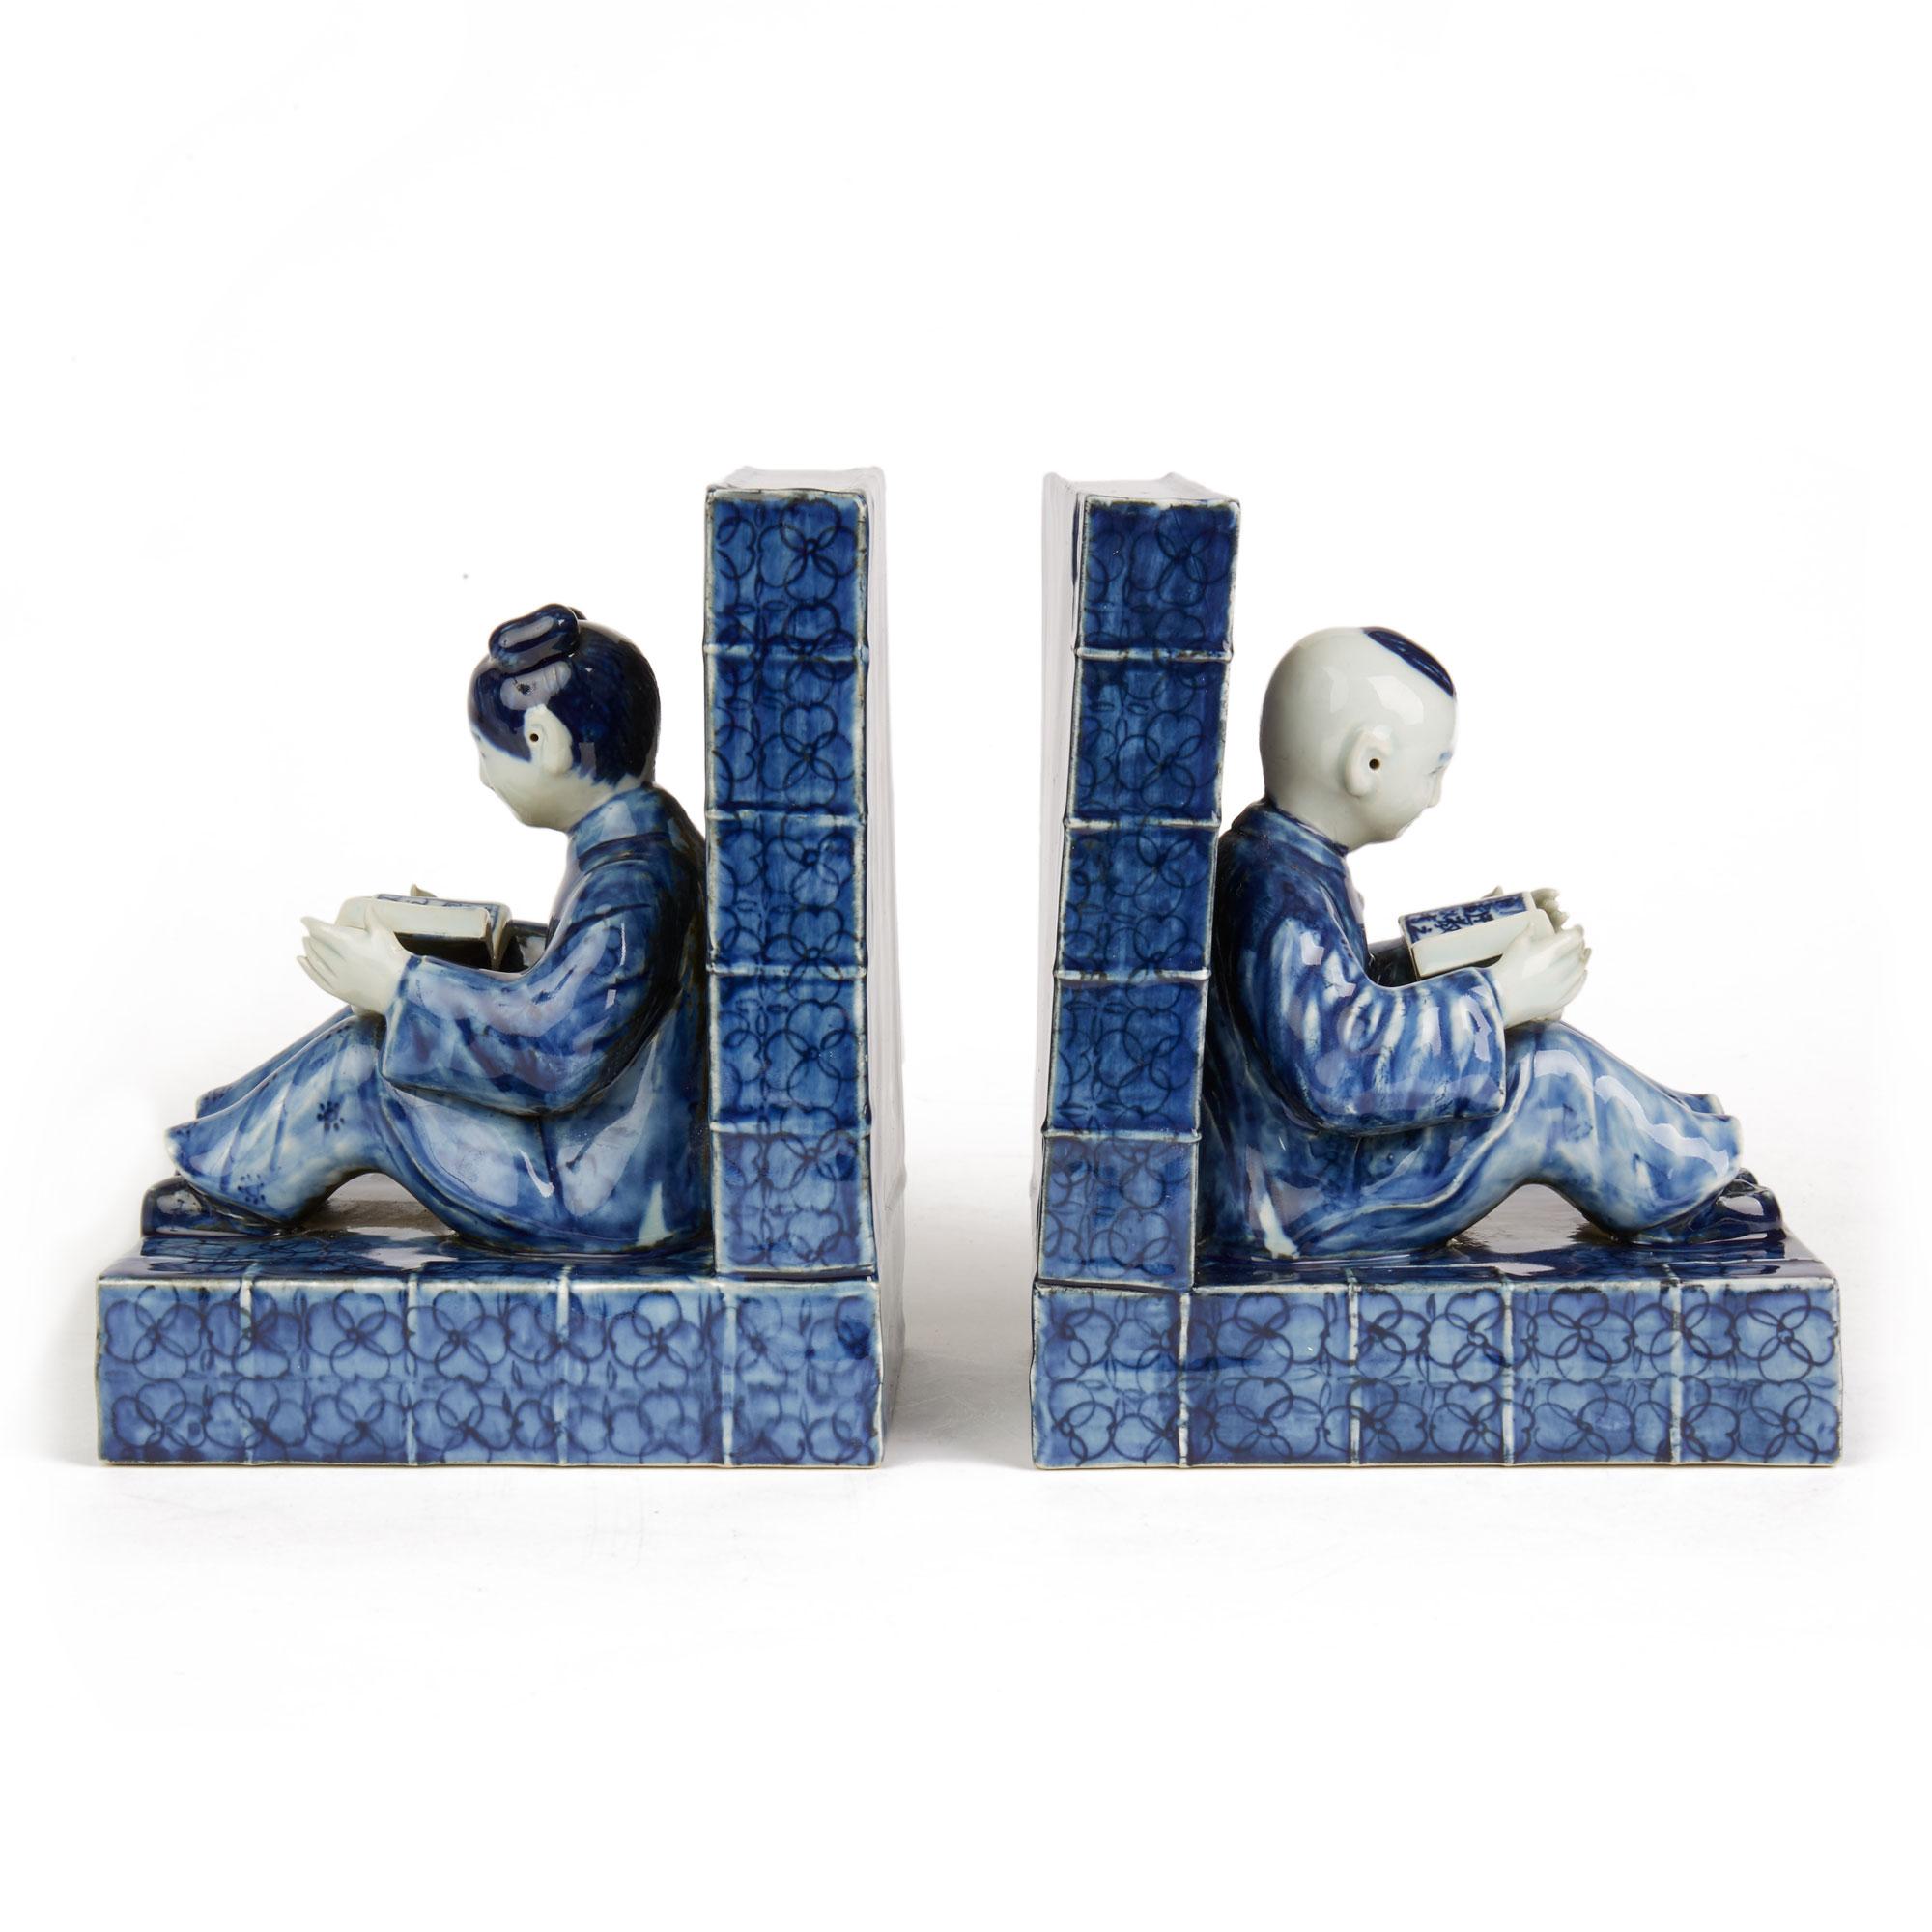 A scarce and unusual pair vintage Chinese Republic period porcelain bookends, solidly constructed and formed as two books forming an 'L' shape. The bookends are mounted with figures, one with a your seated boy reading a book and the other with a